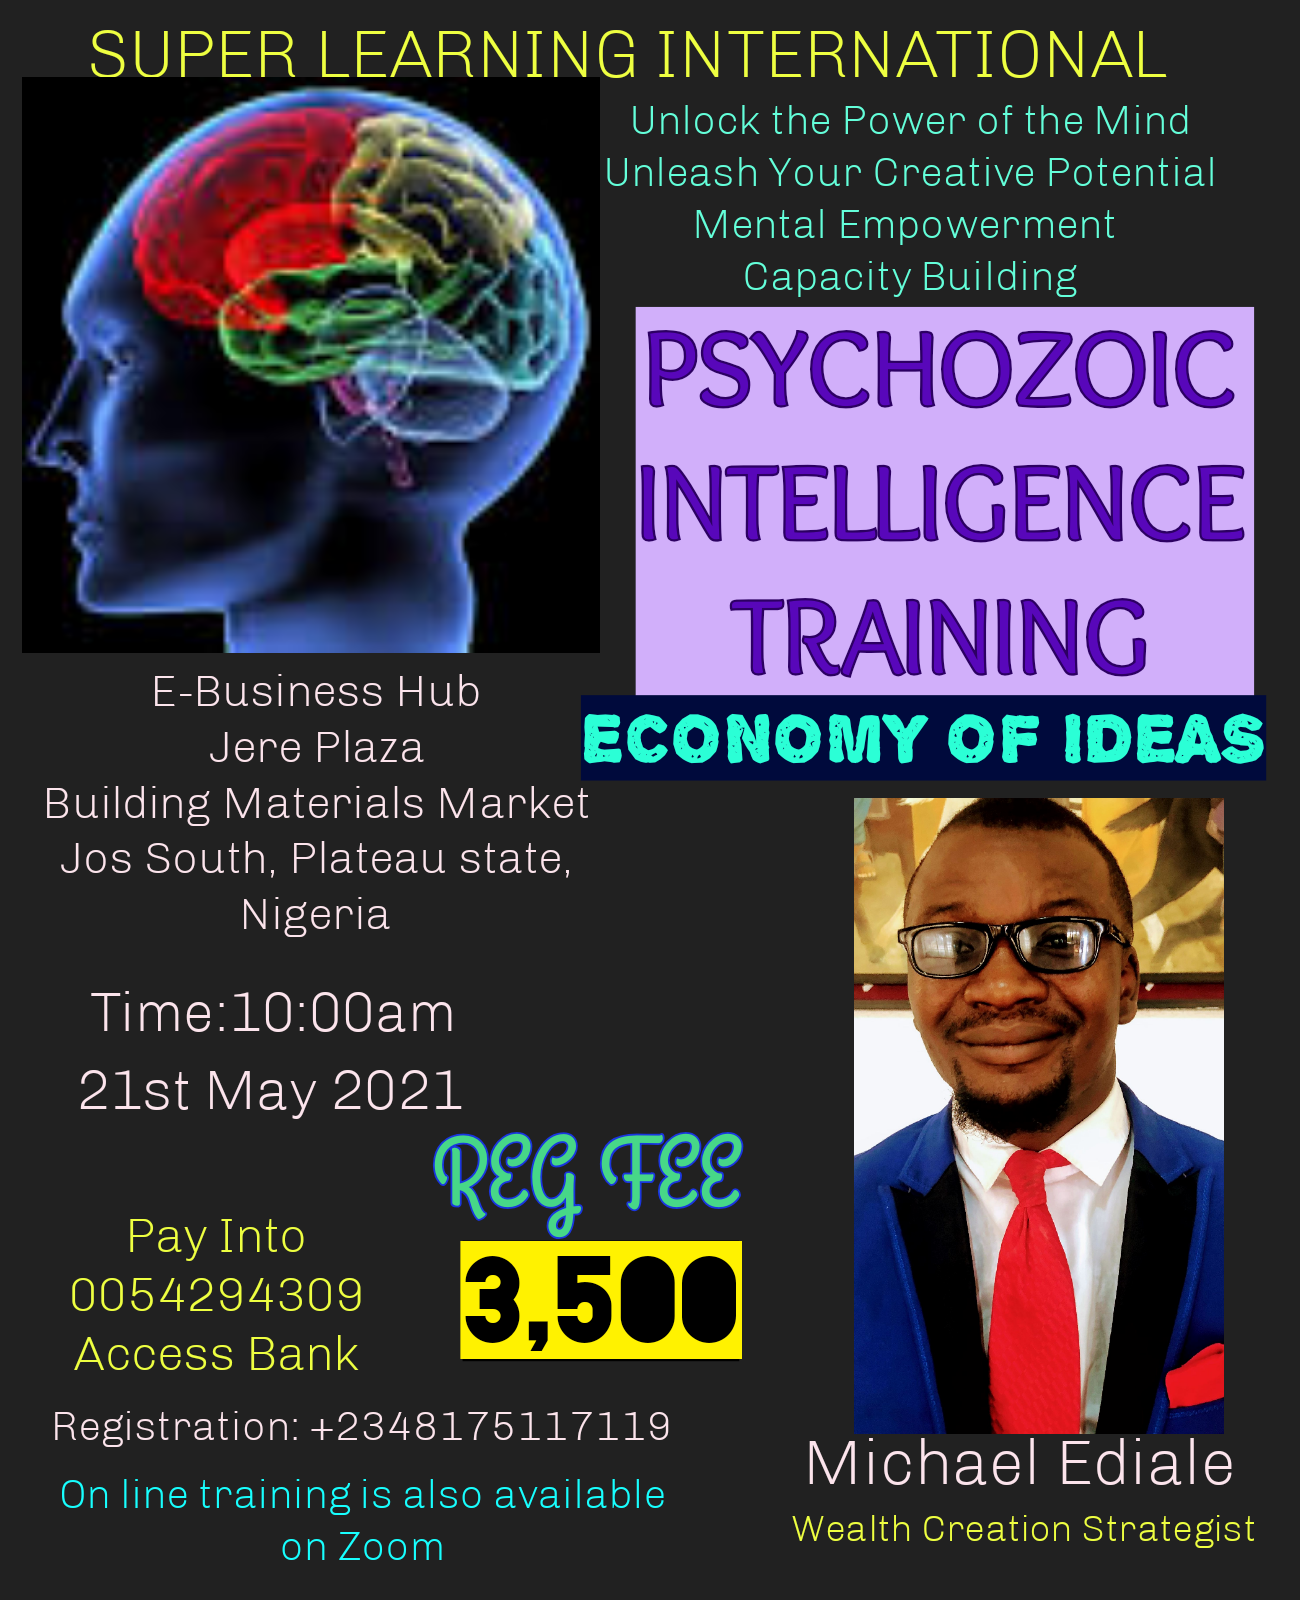 PSYCHOZOIC INTELLIGENCE TRAINING Post free event in Nigeria using tickethub.ng, buy and sell tickets to event